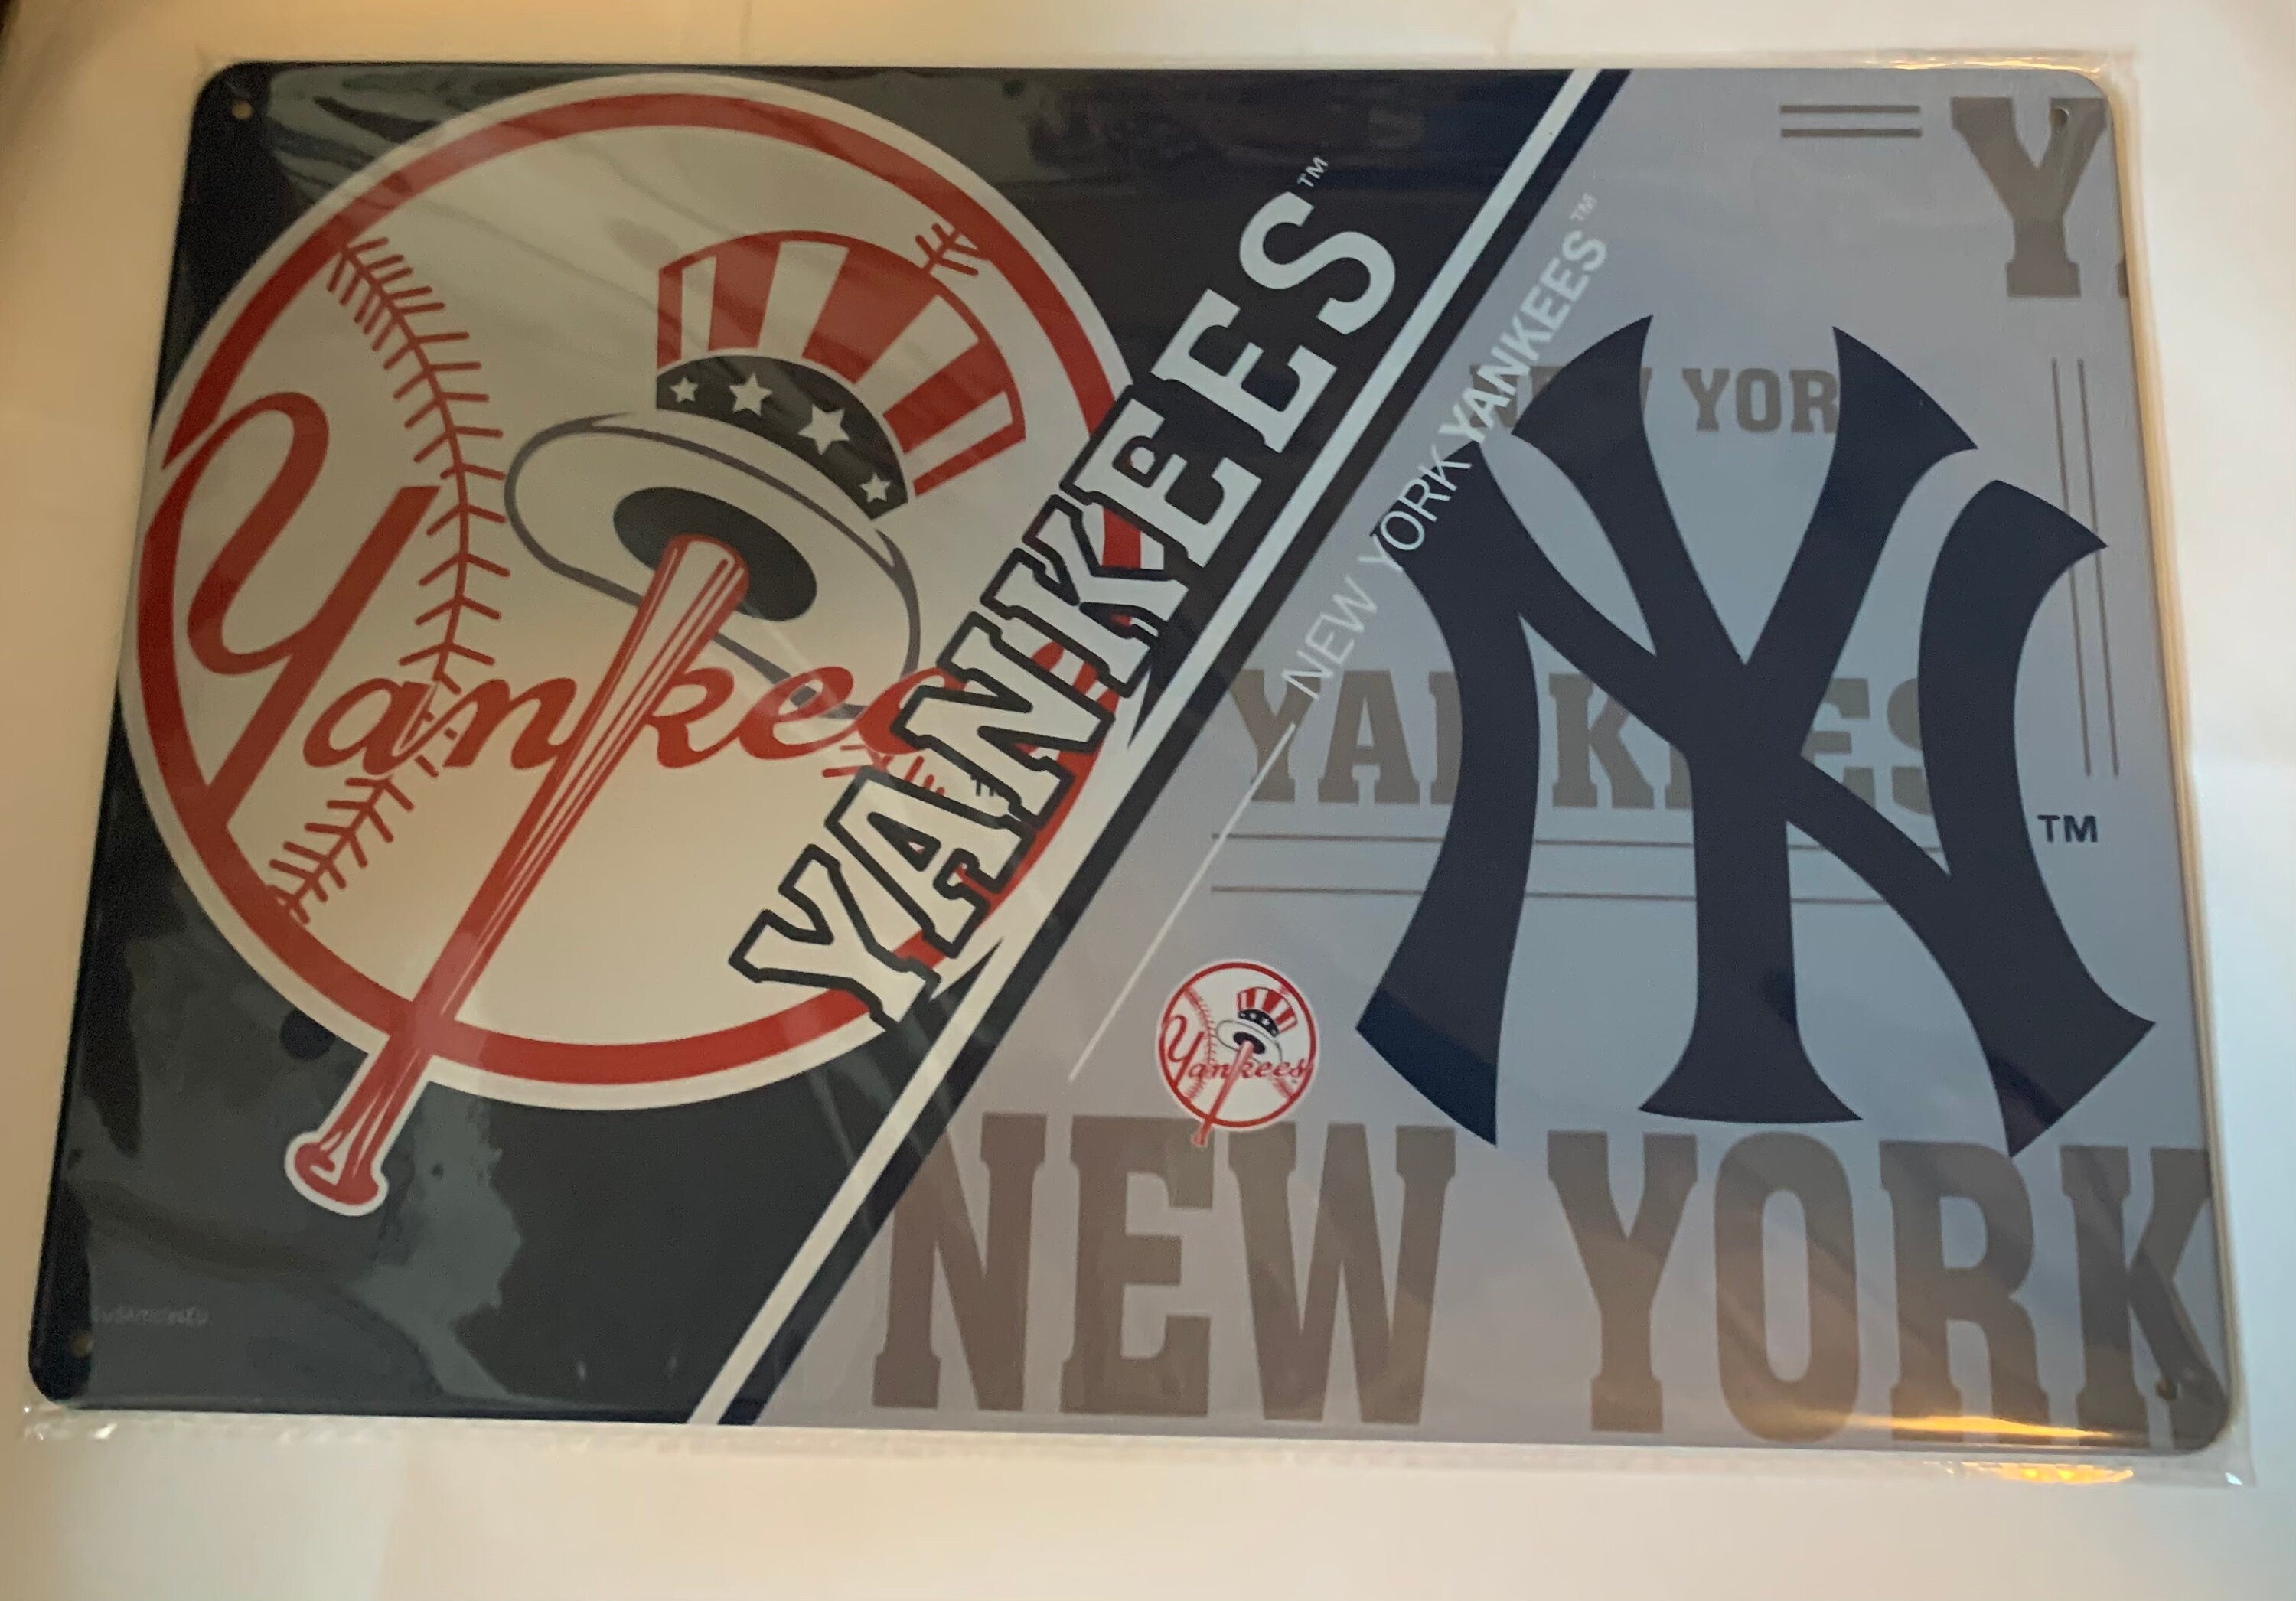 New York Yankees NY Baseball USA metal plate license plate Vintage gift sports displays arts and crafts projects honkbal ball license plate - #1 fan